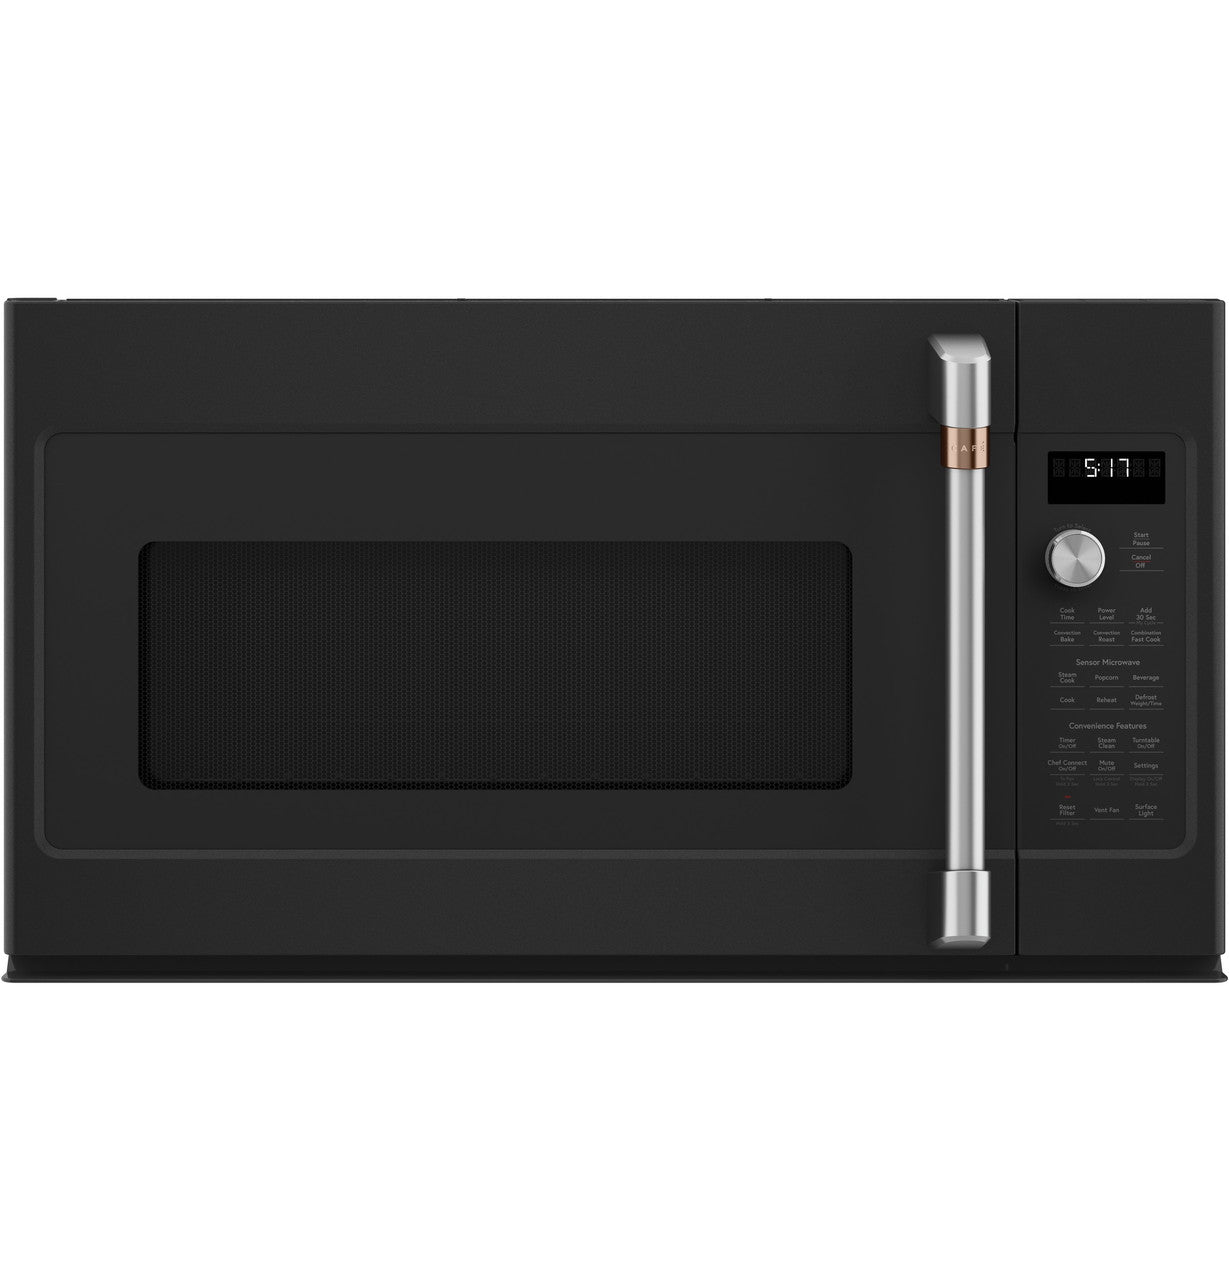 GE Café™ 1.7 Cu. Ft. Convection Over-the-Range Microwave Oven